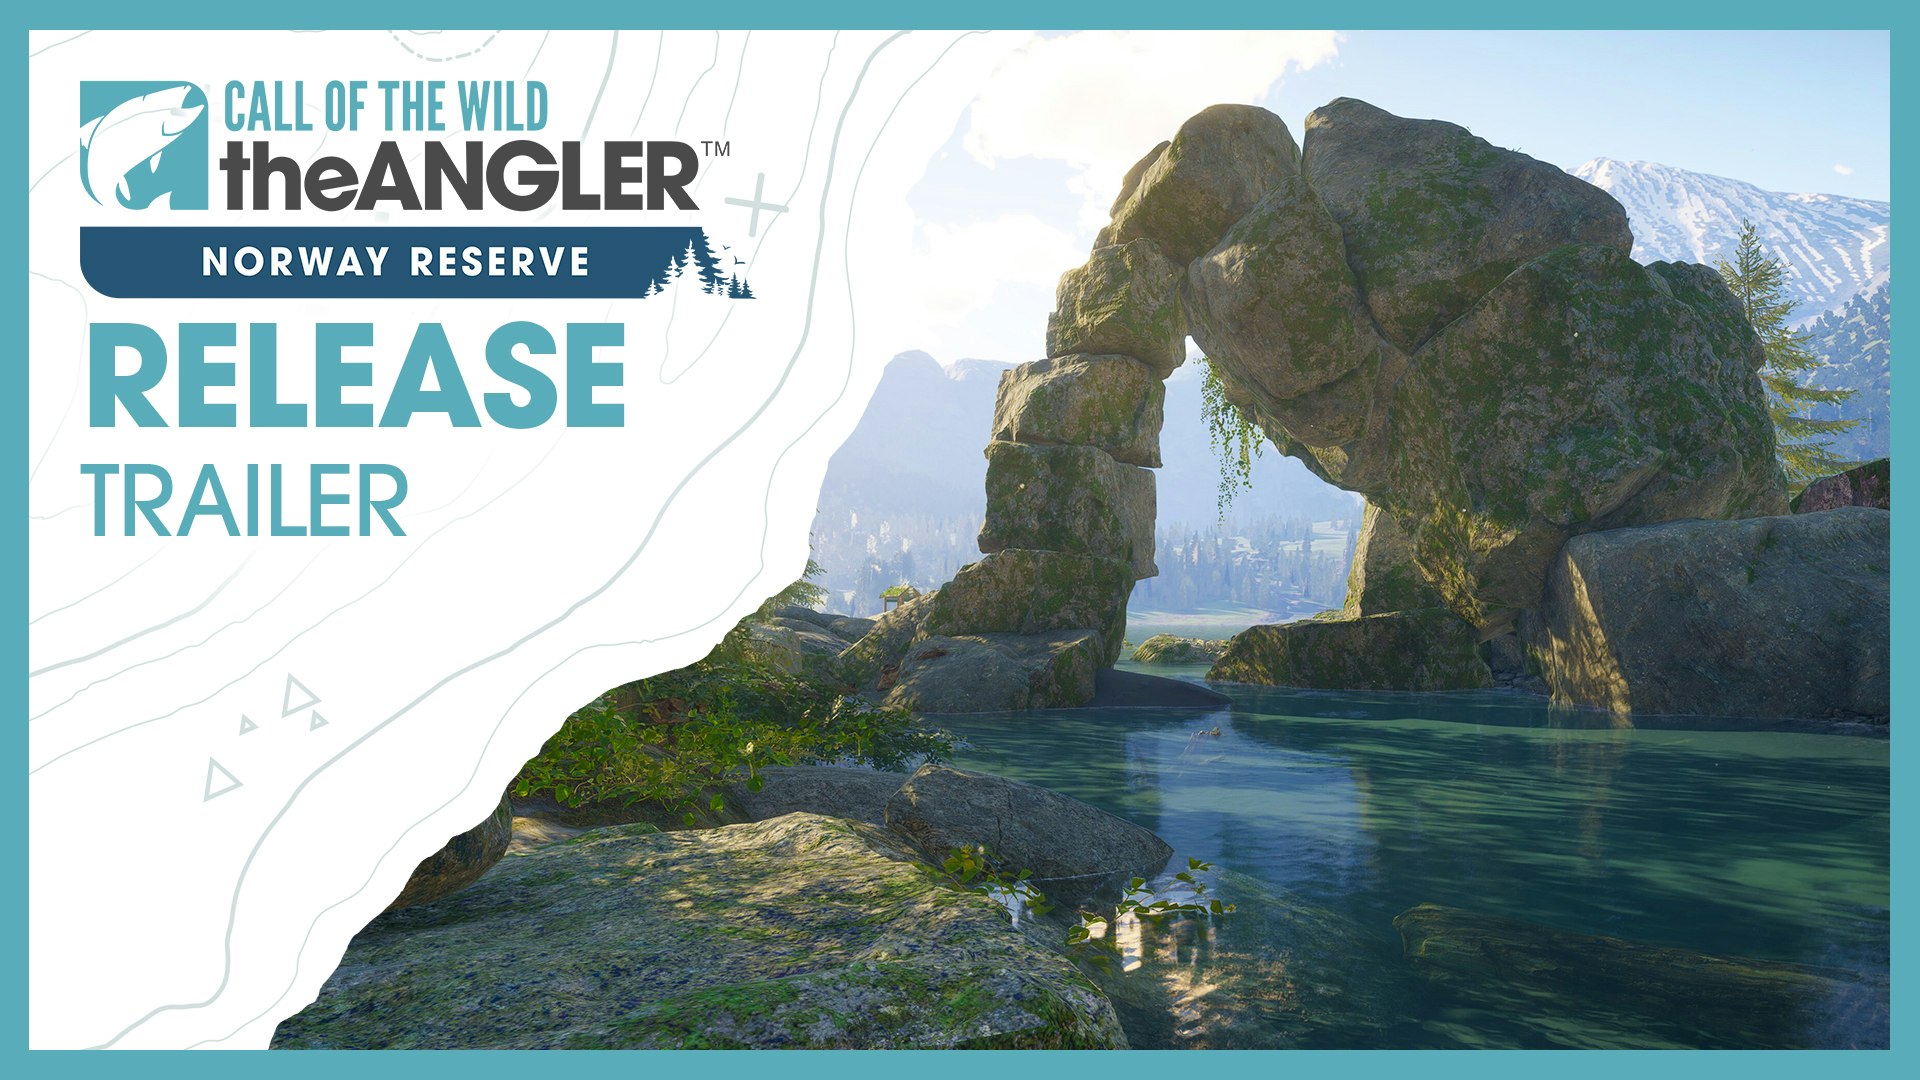 The Angler's second reserve PC release trailer: Trollsporet Nature Reserve, Norway